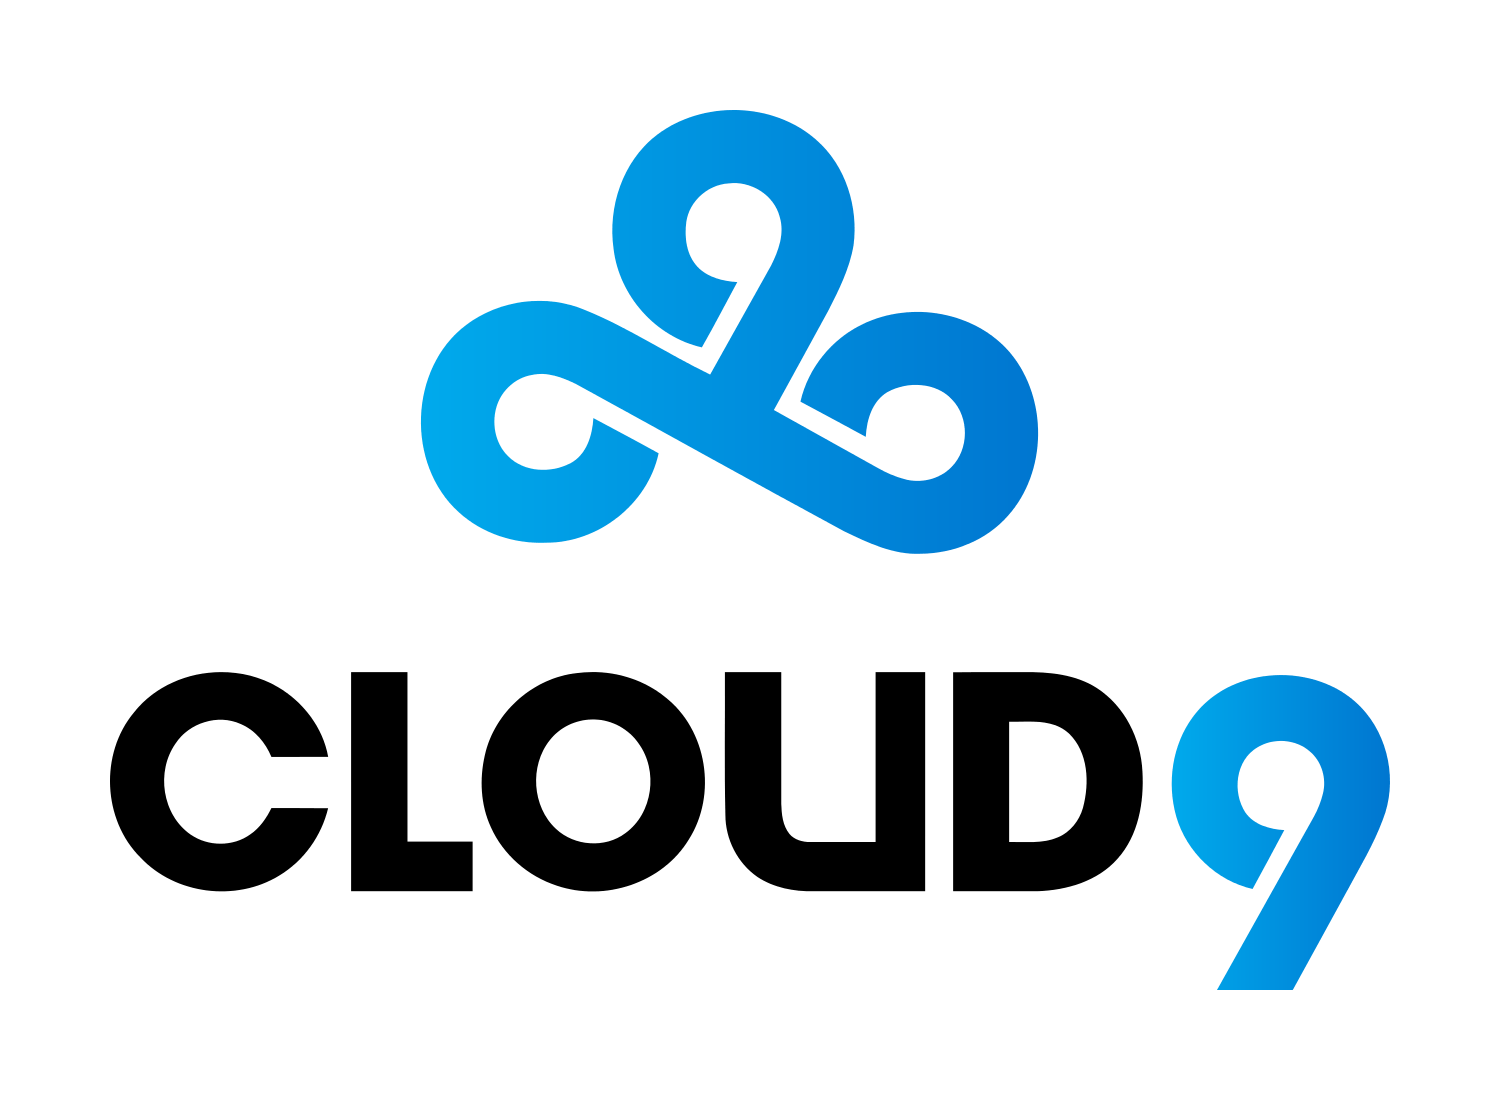 C9 Logo - Cloud 9 Logo, Cloud 9 Symbol, Meaning, History and Evolution